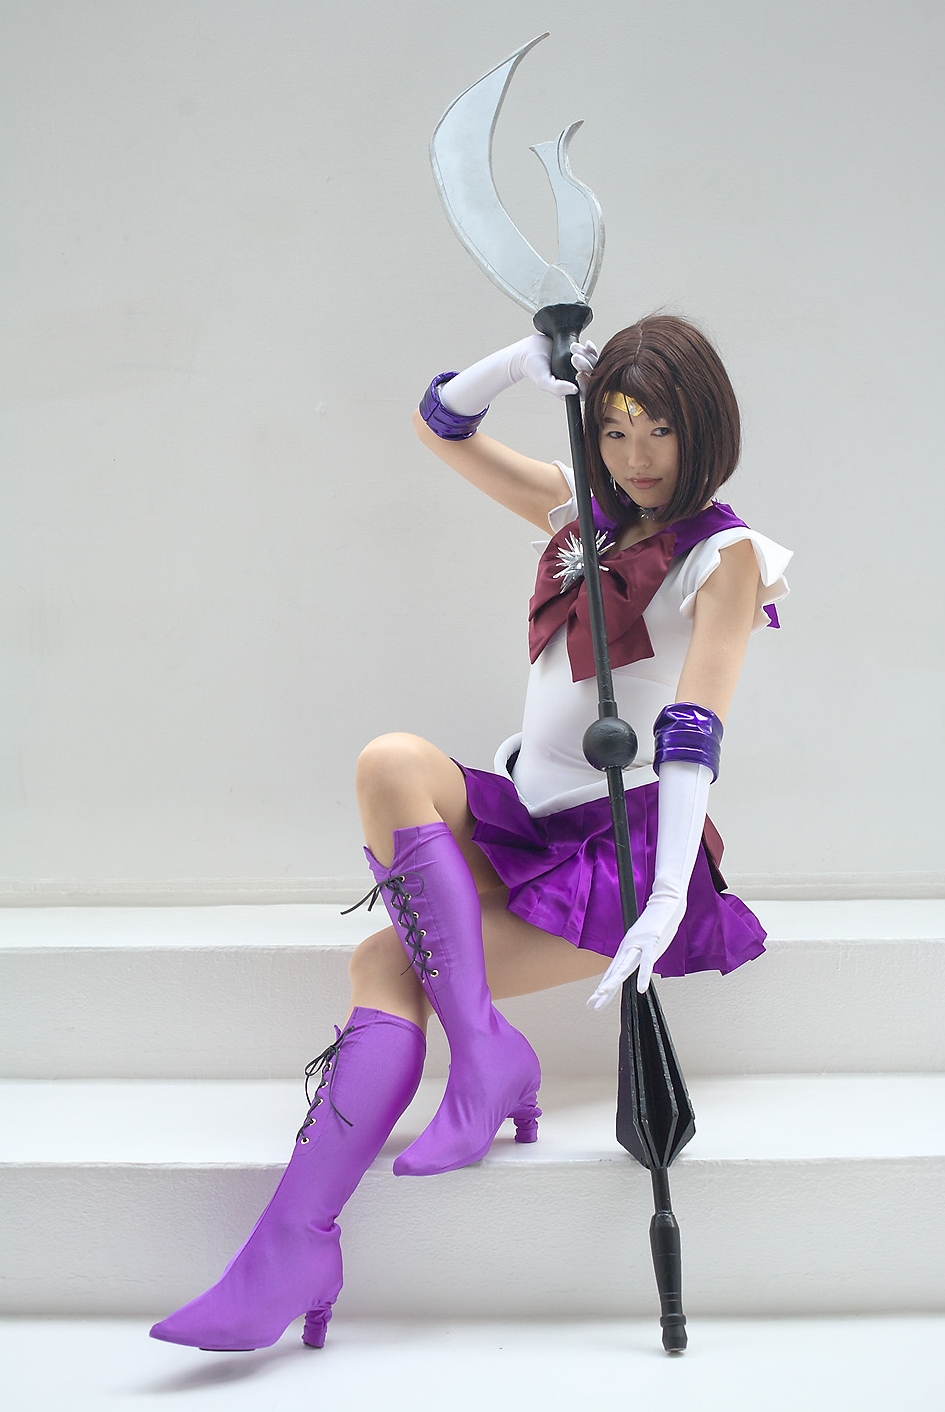 Brunette Asian Cosplay Girl wearing Sailor Moon Costume, Purple Miniskirt and Boots with Heels